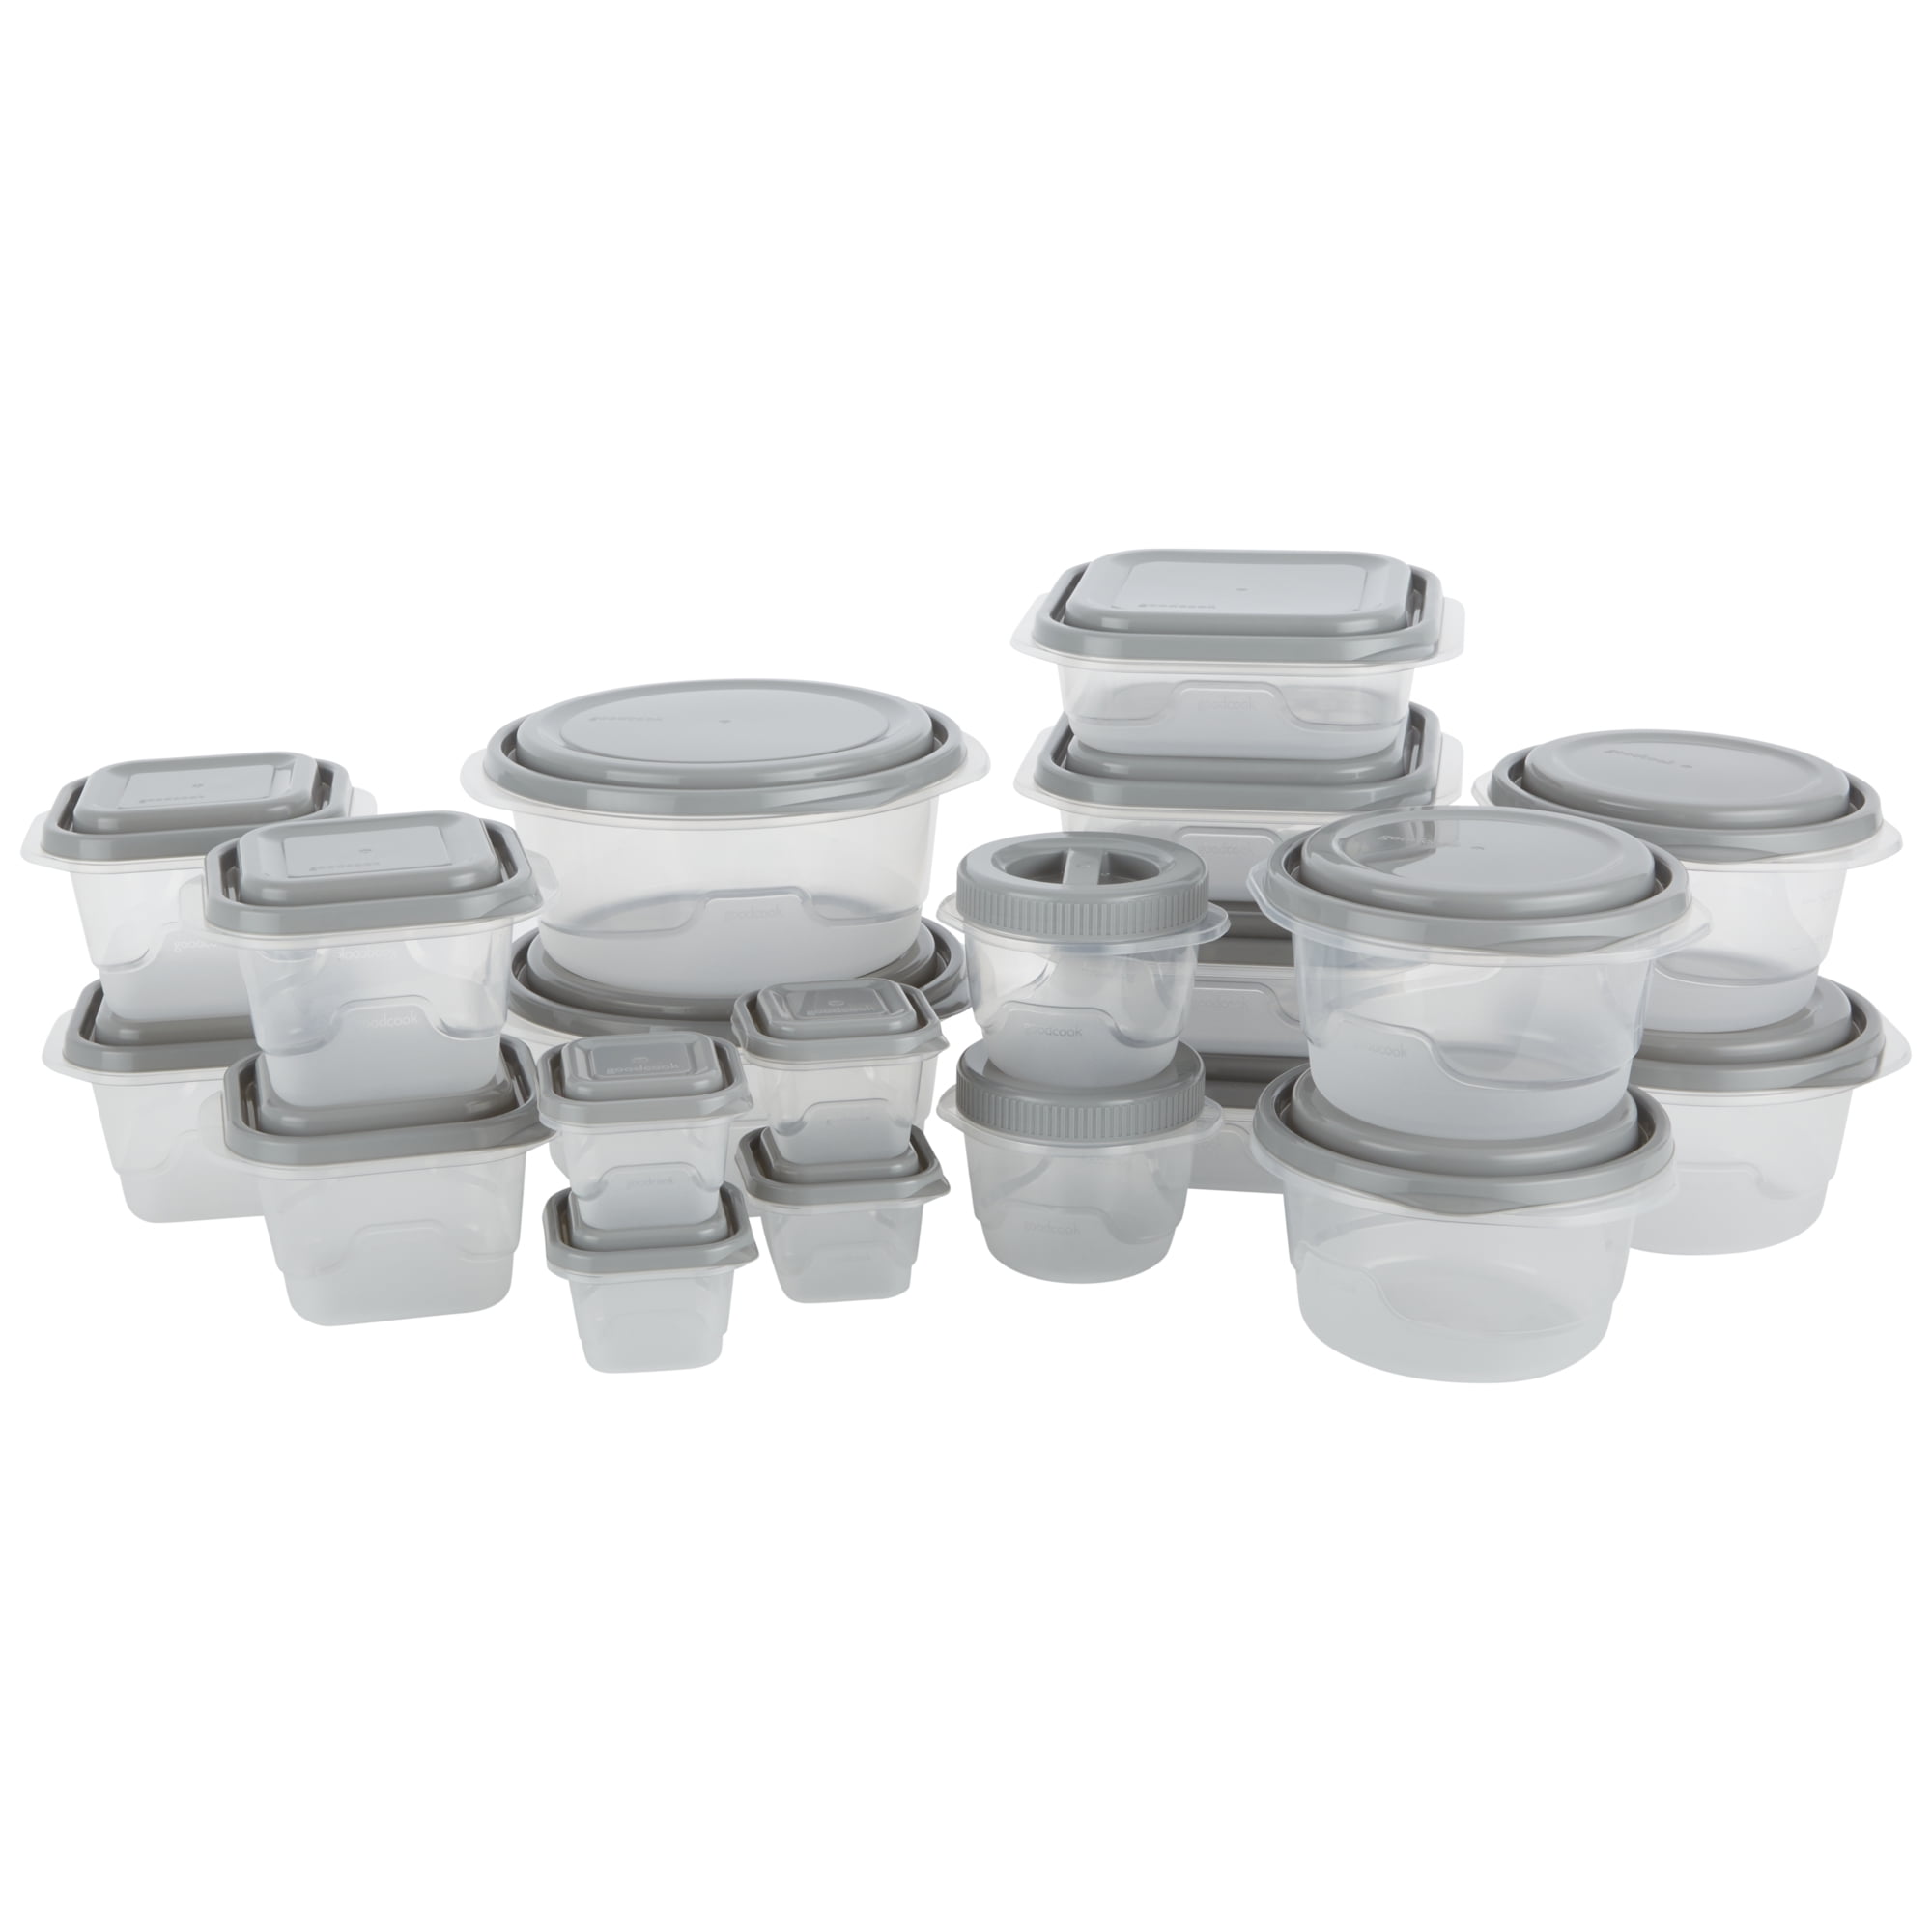 Good Cook EveryWare™ Large Bowls Containers + Lids, 3 ct - Kroger